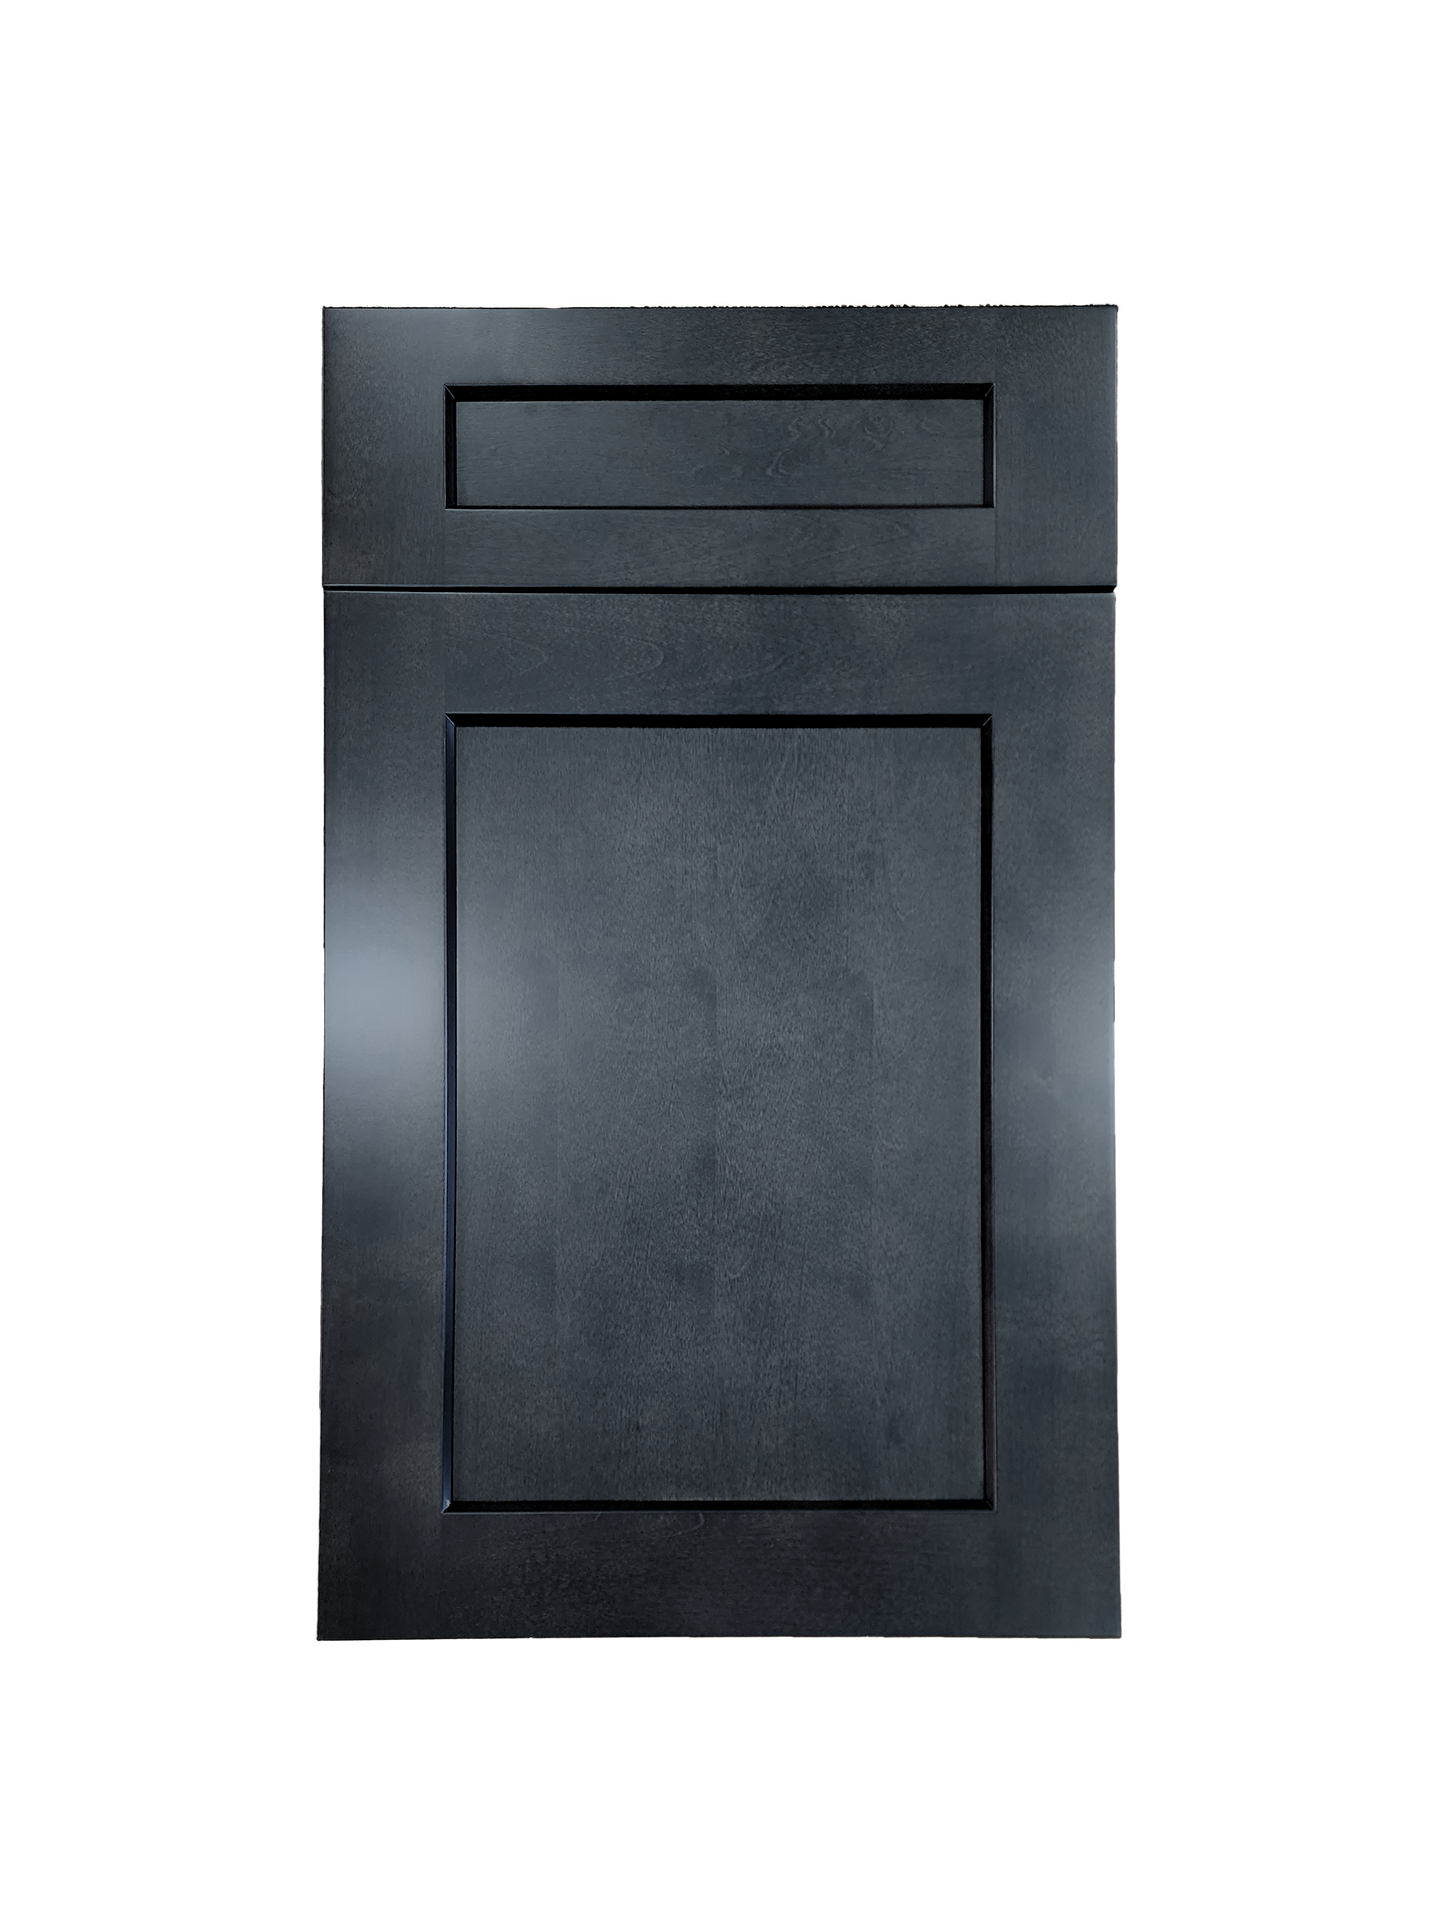 Stormy Grey Wall Refrigerator Cabinet 33 inches wide 24 inches deep 21 inches tall with Stormy Grey box and Stormy Grey doors